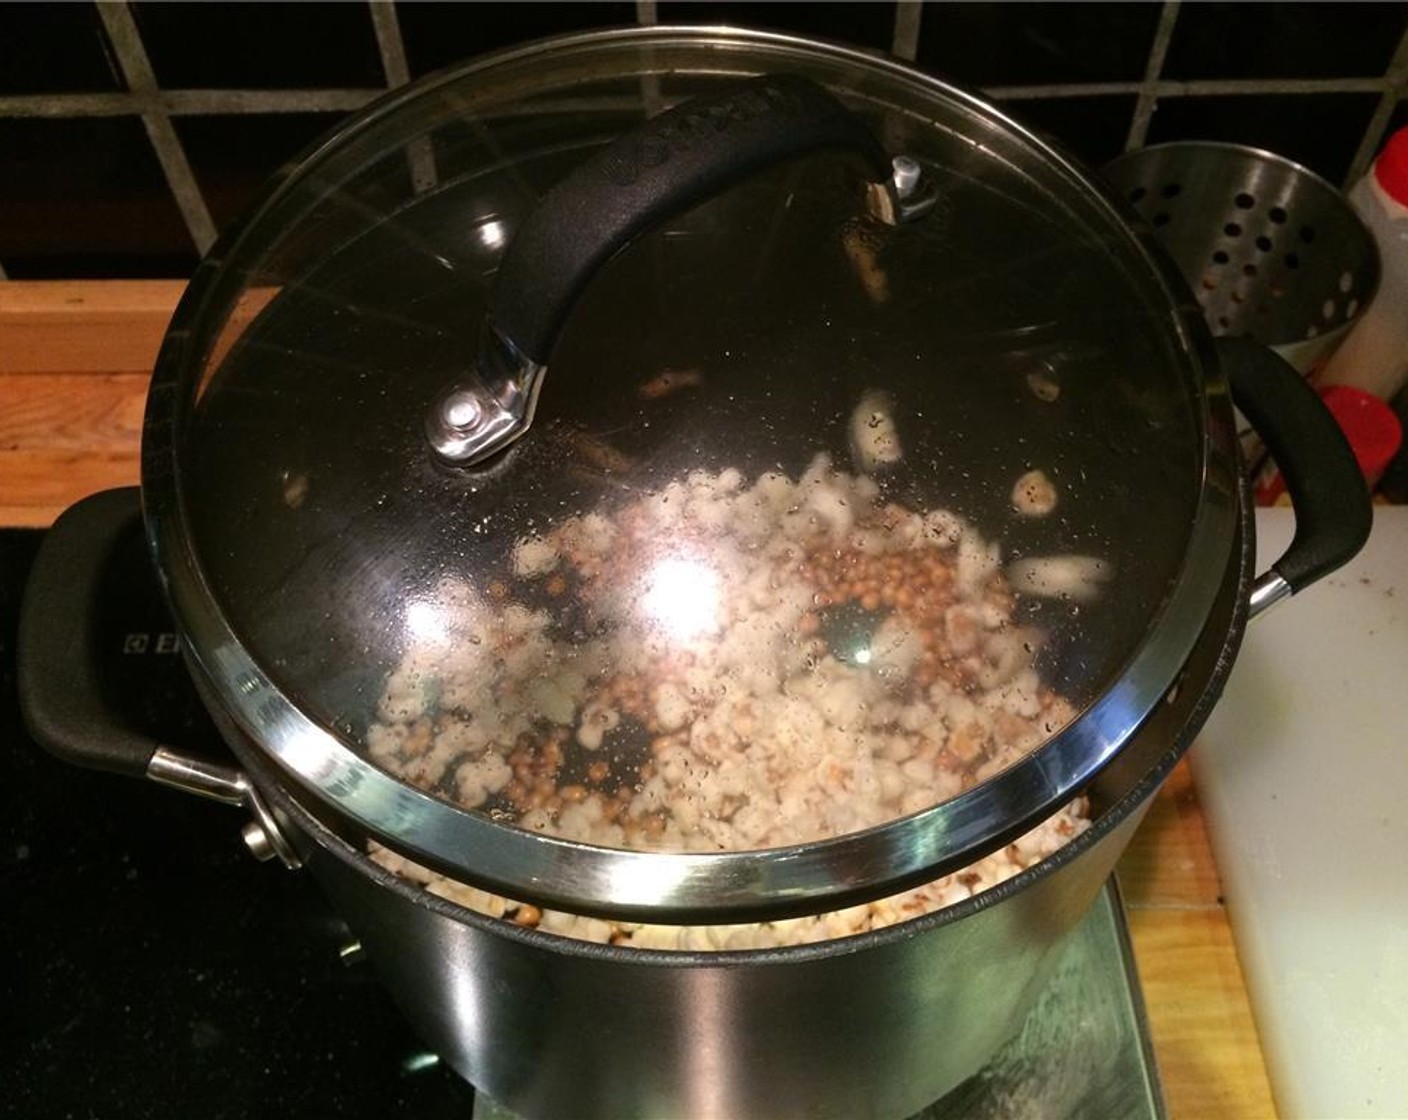 step 7 As the kernels start to pot, gently shake the pot back and forth over the heat to ensure even heating.